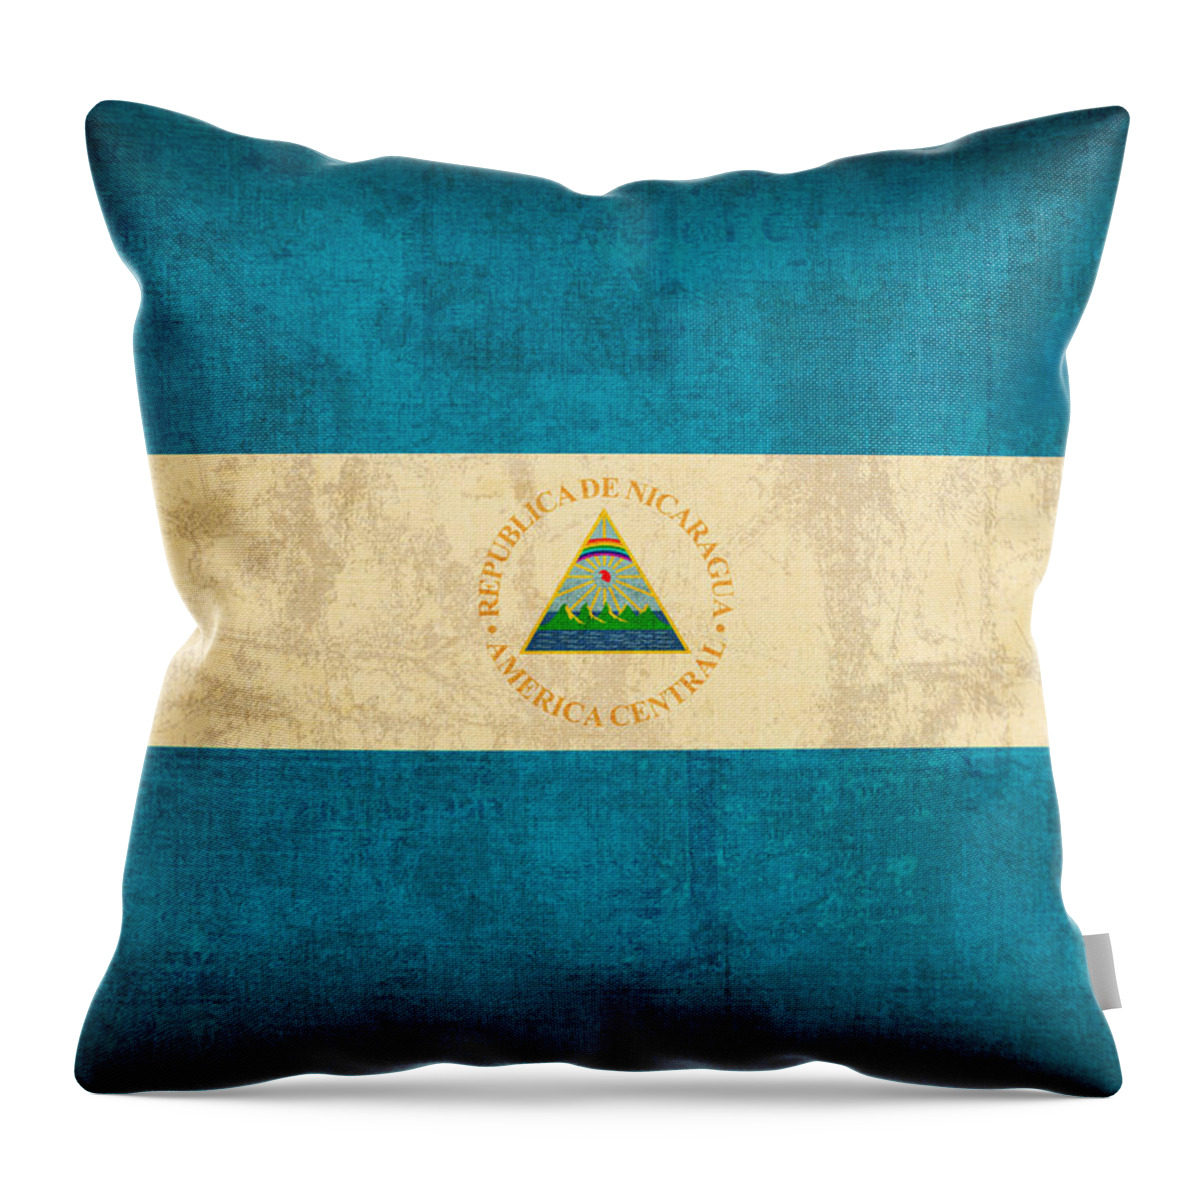 Nicaragua Throw Pillow featuring the mixed media Nicaragua Flag Vintage Distressed Finish by Design Turnpike